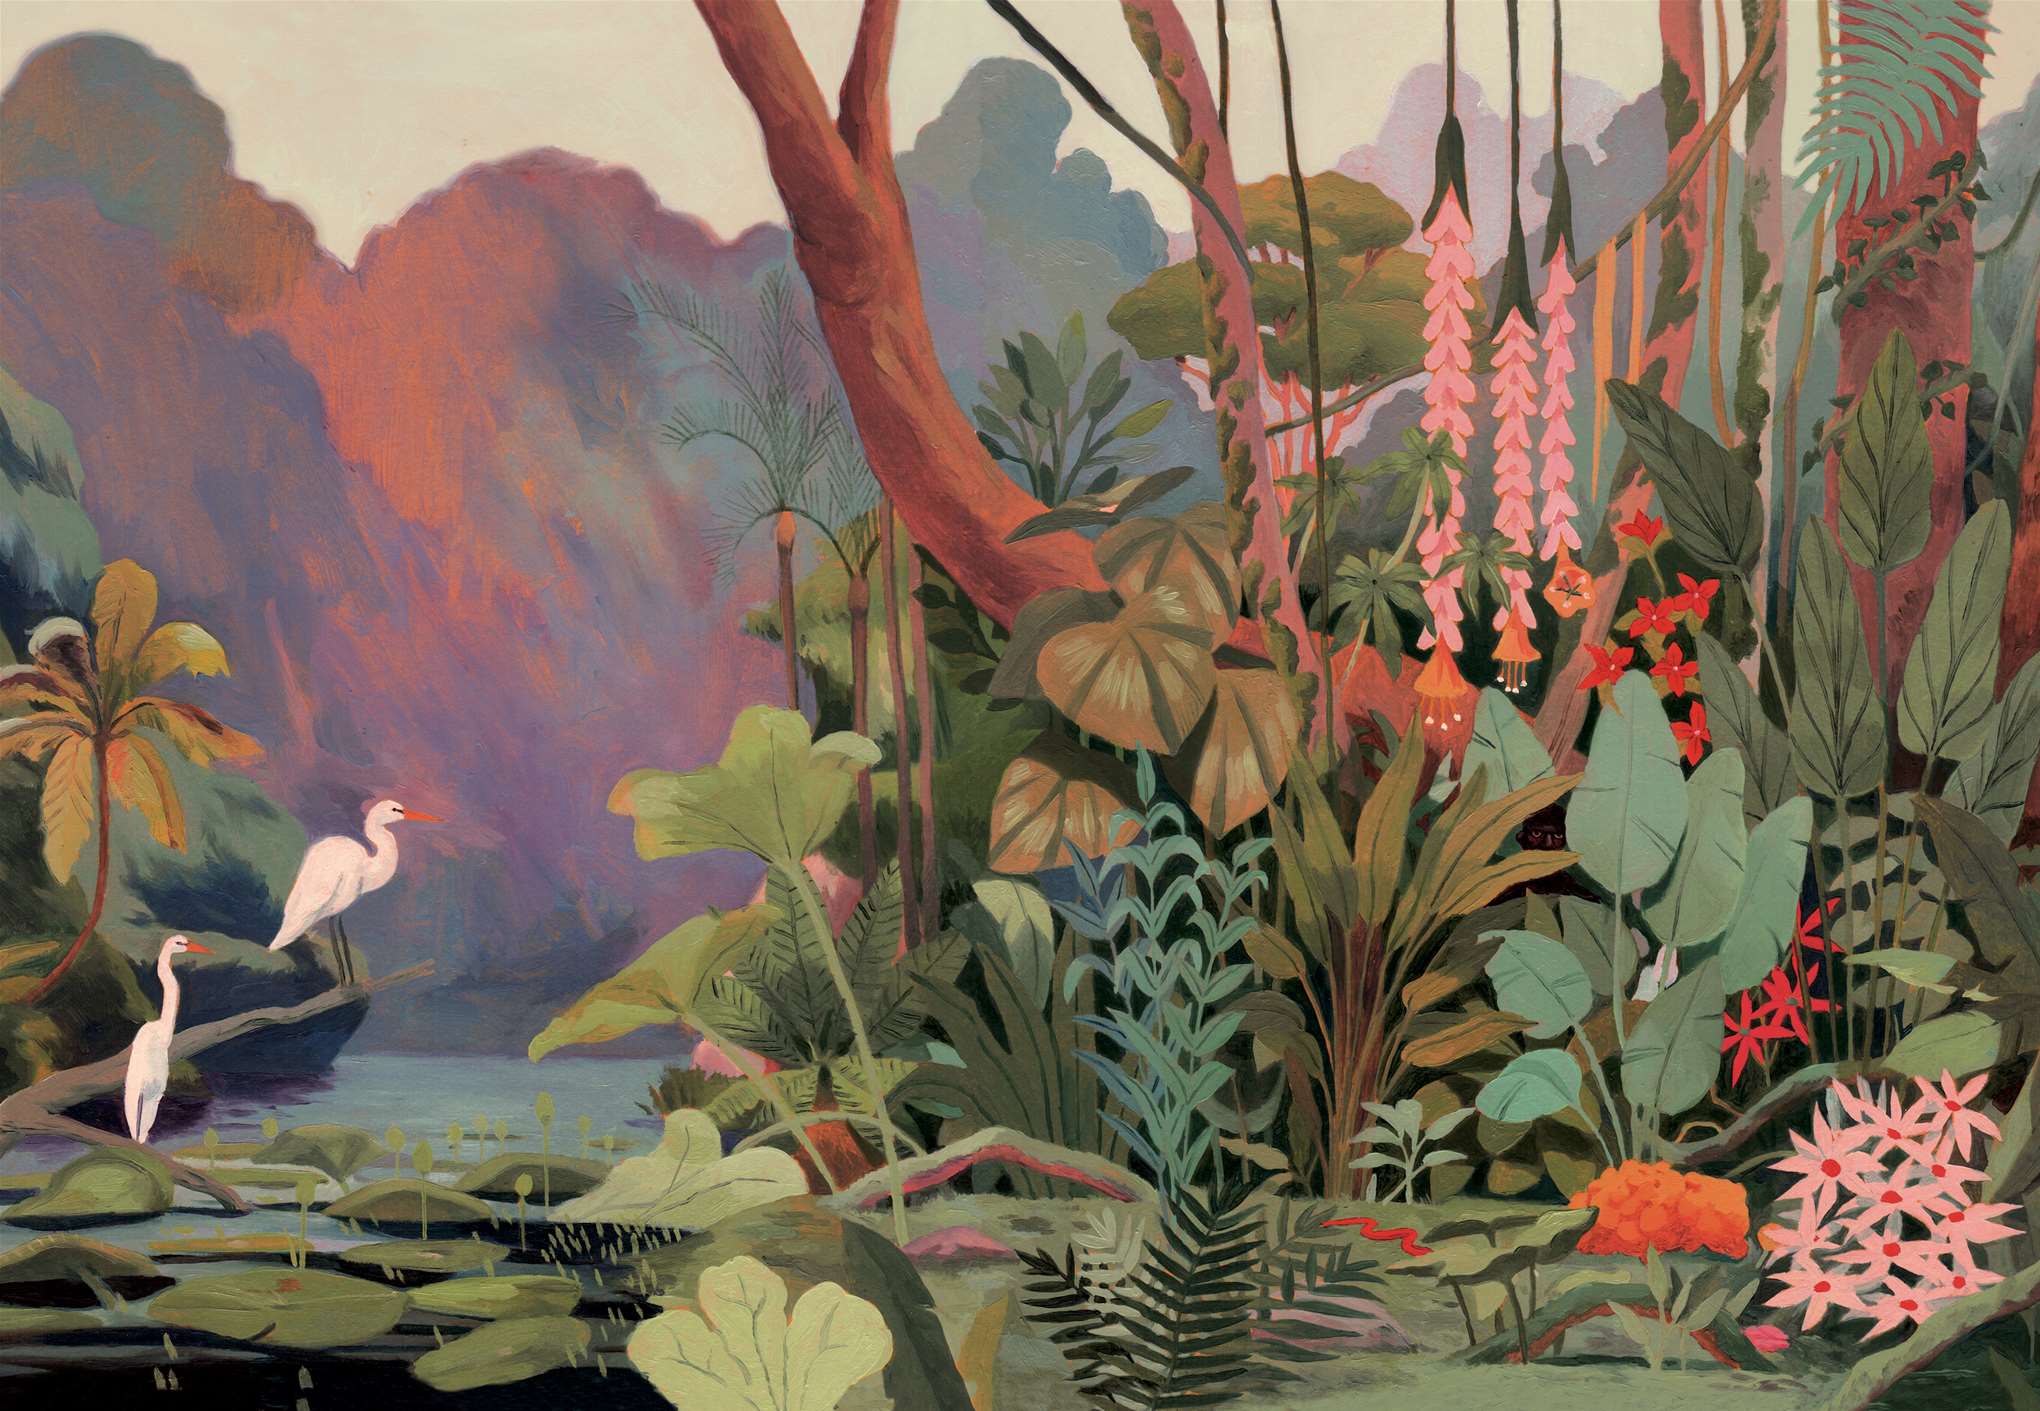 David De Las Heras, Painterly detailed illustration of a wildlife landscape, with heron birds, butterflies, birds and trees. Floral, botanical, decorative, beautiful oil painting. 